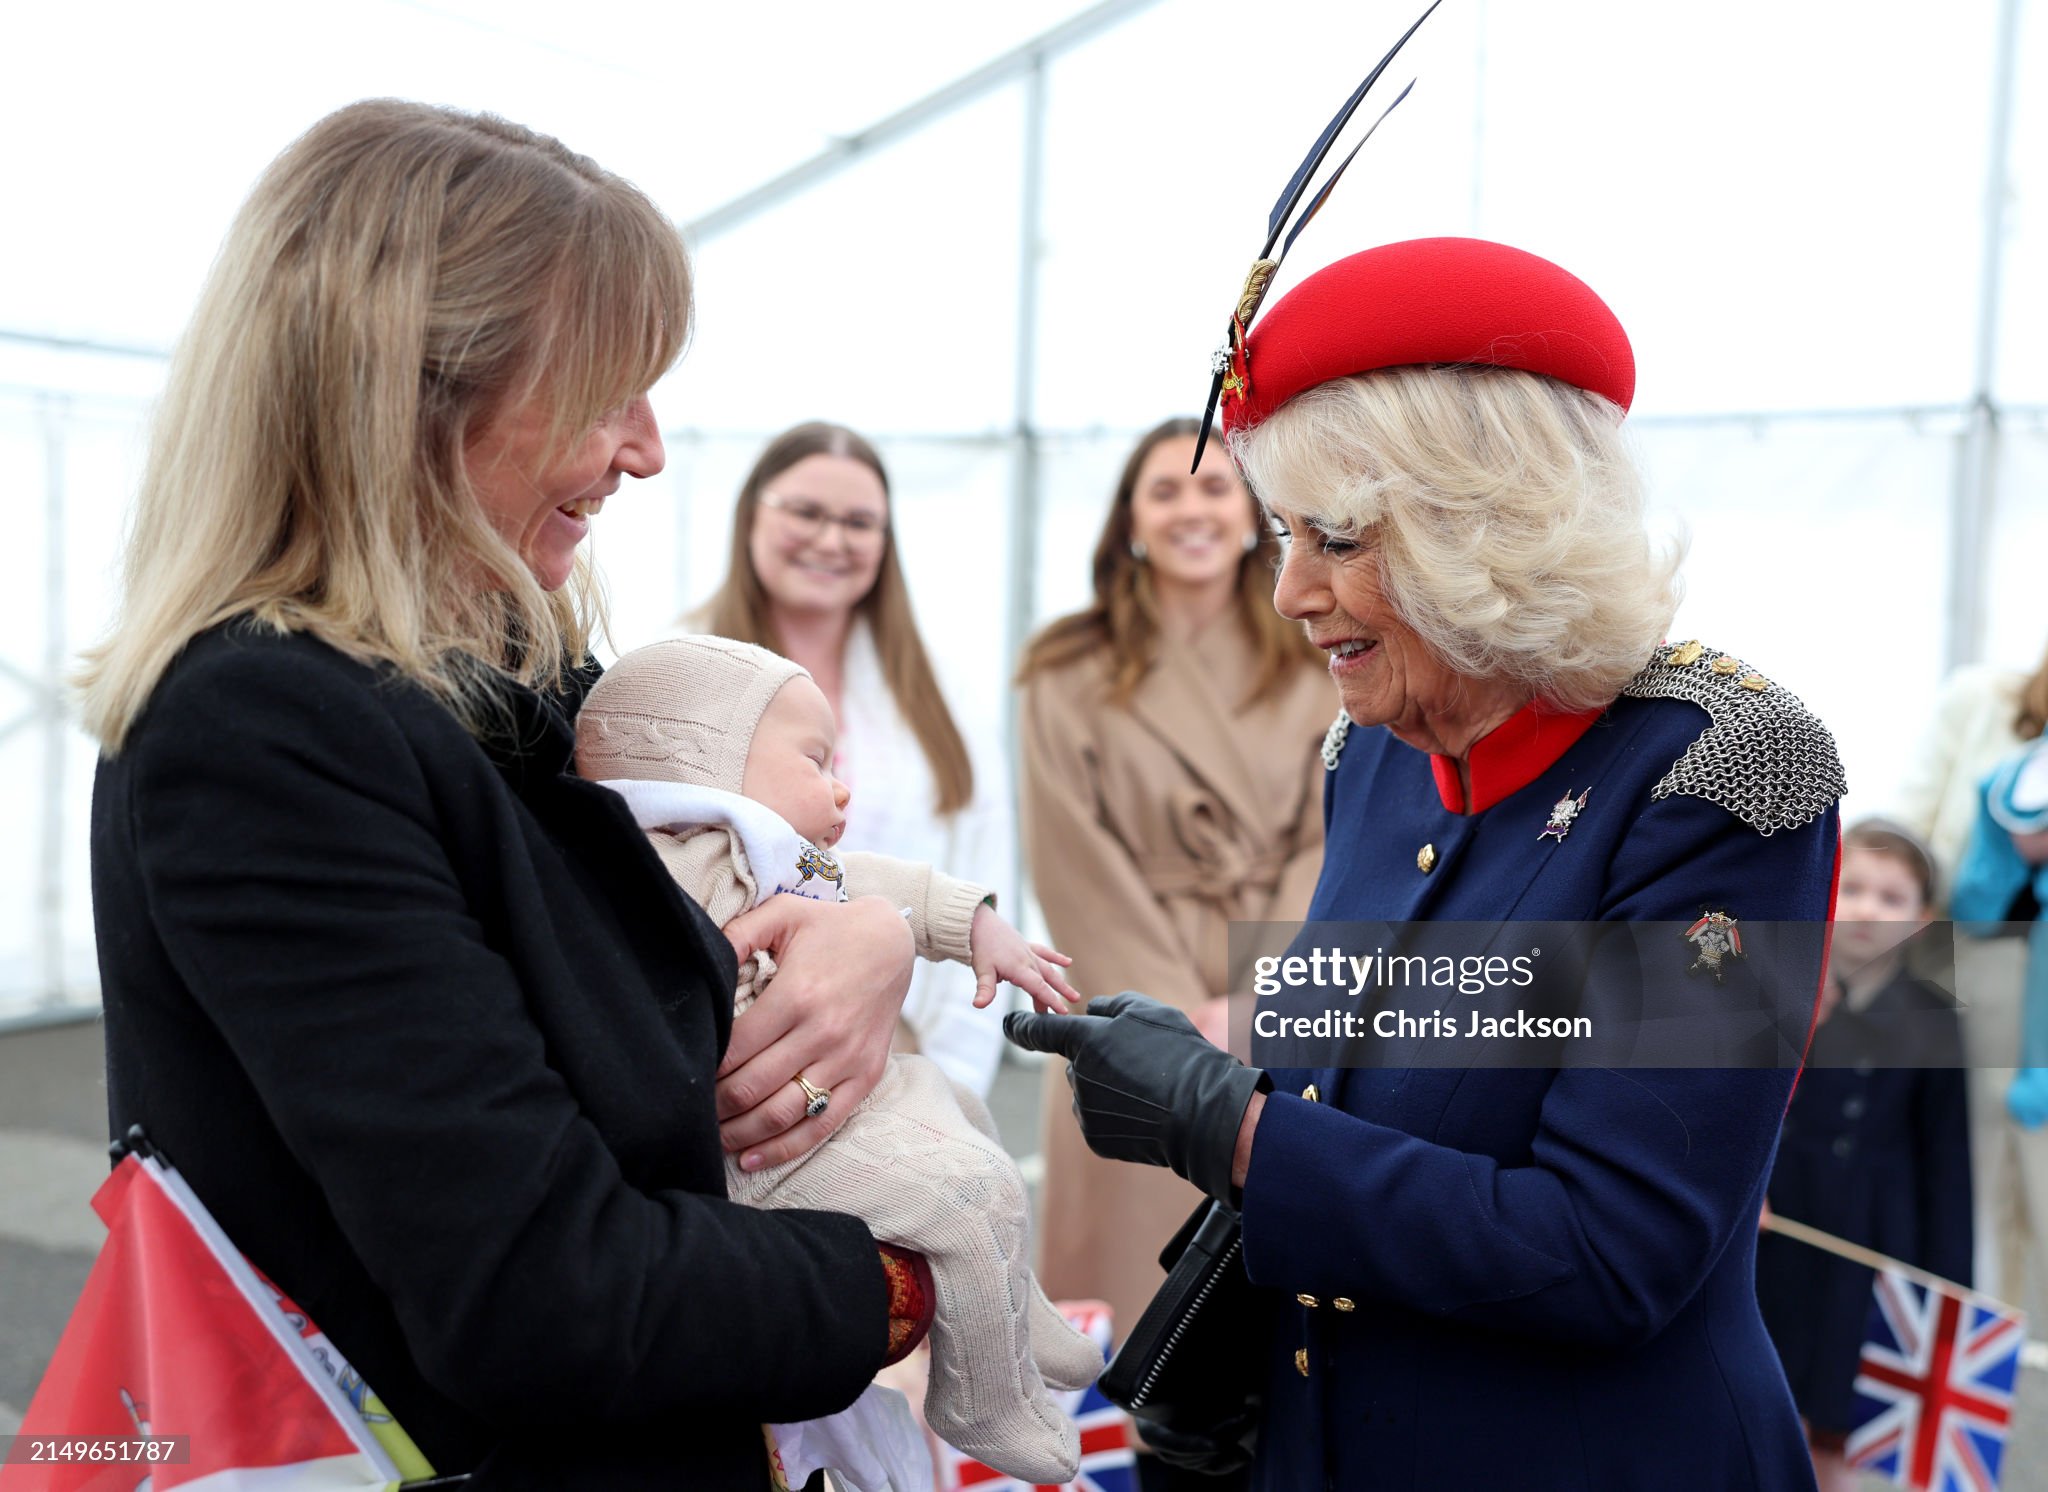 queen-camilla-visits-the-royal-lancers-in-north-yorkshire.jpg?s=2048x2048&w=gi&k=20&c=2xMWttUOAGLo1Teba6asIpDwmNW_V3n_ope7jVpkK2s=